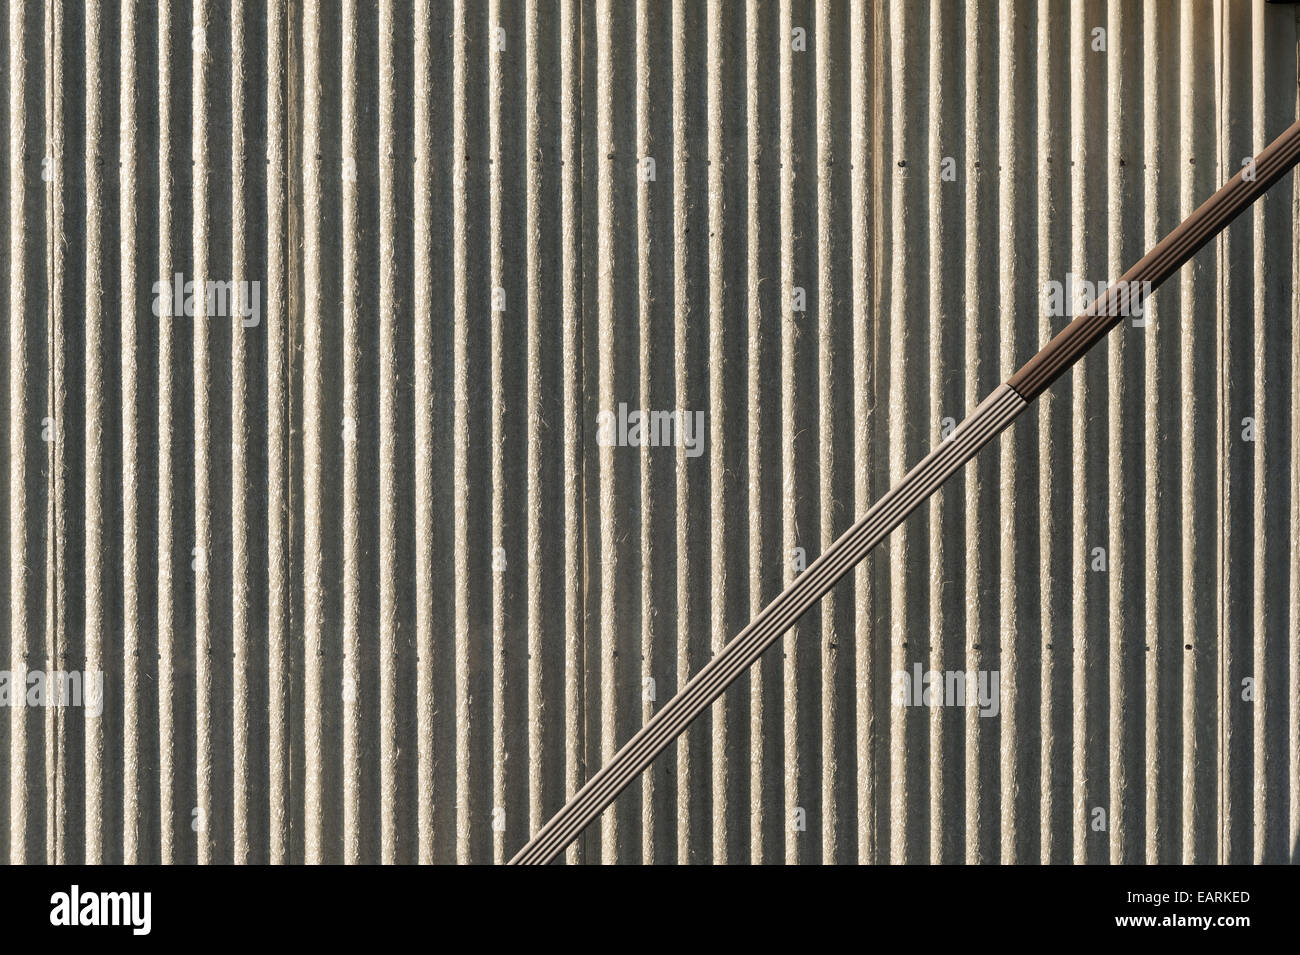 Corrugated Metal Wall With Angled Downspout Stock Photo